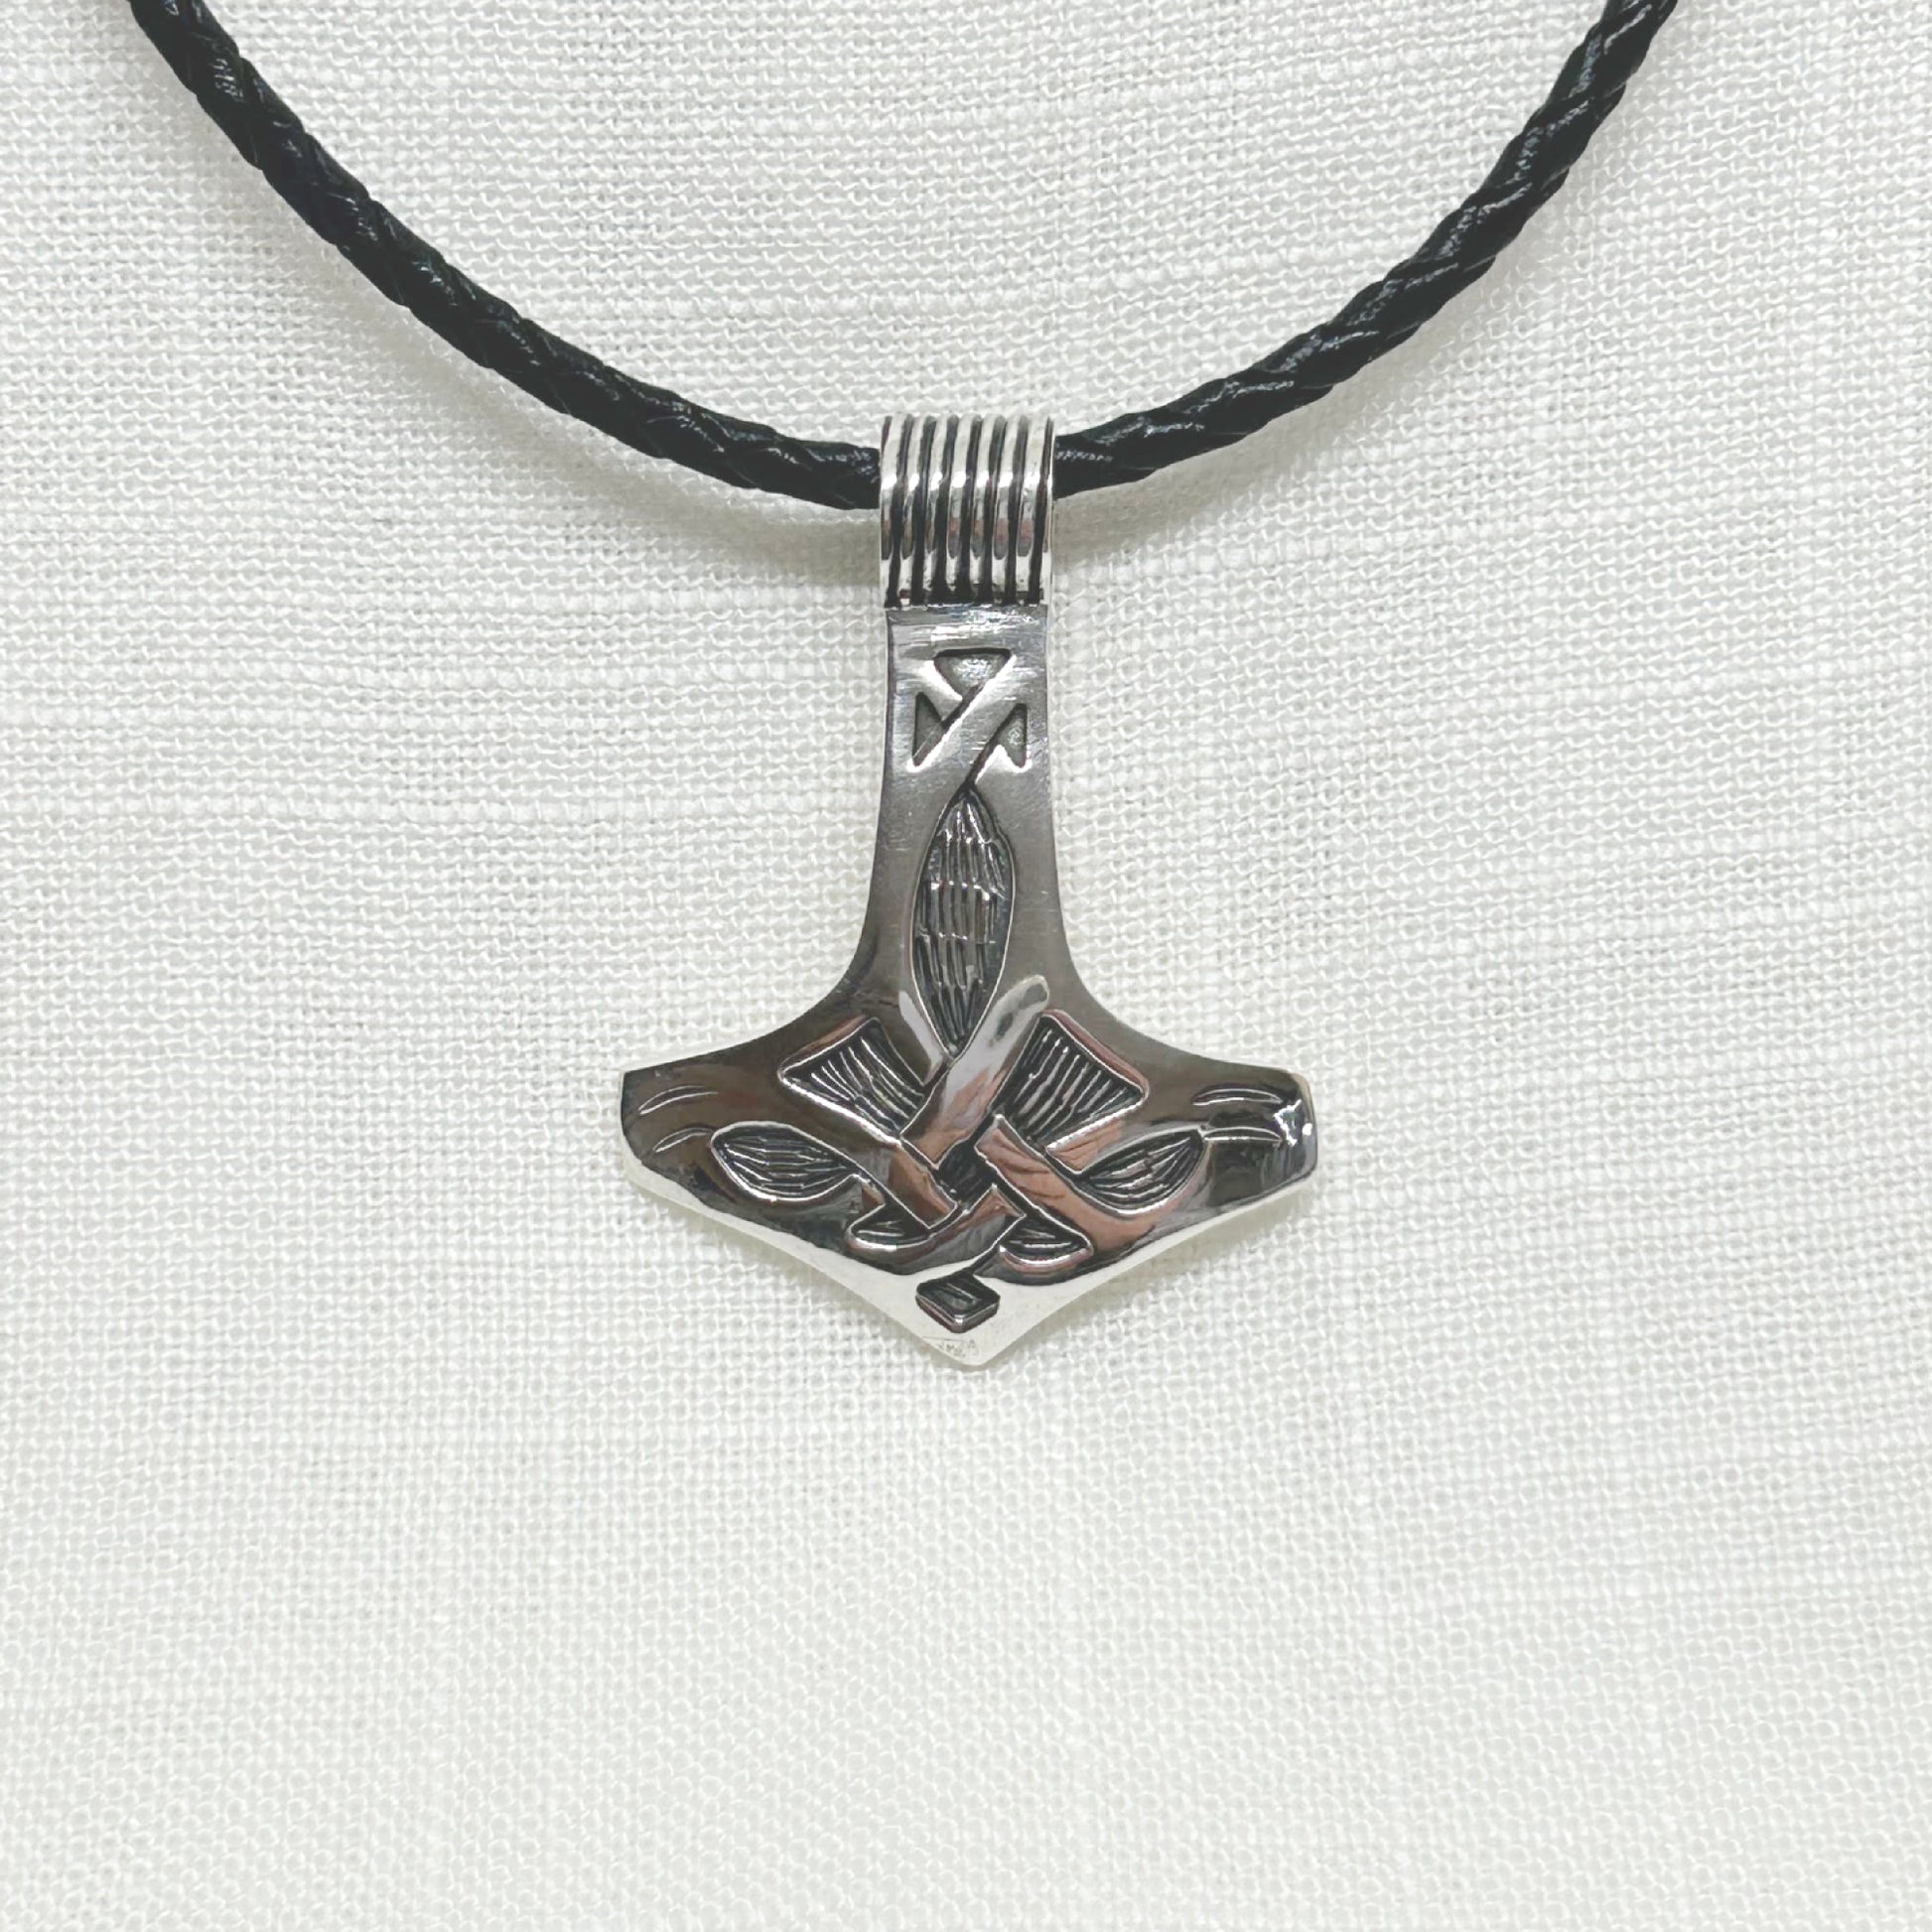 This beautifully crafted large Thor's Mjolnir is set in .925 silver. With exquisite detailing, it is also slightly domed to show off the craftsmanship. The Mjolnir is a Viking amulet of protection and power. The size is 4.7cm in length x 3.5cm wide. This pendant comes on an 18" plaited cylindrical leather cord necklace with sterling silver fittings and weighs 10g/0.35oz. All jewellery comes gift boxed.